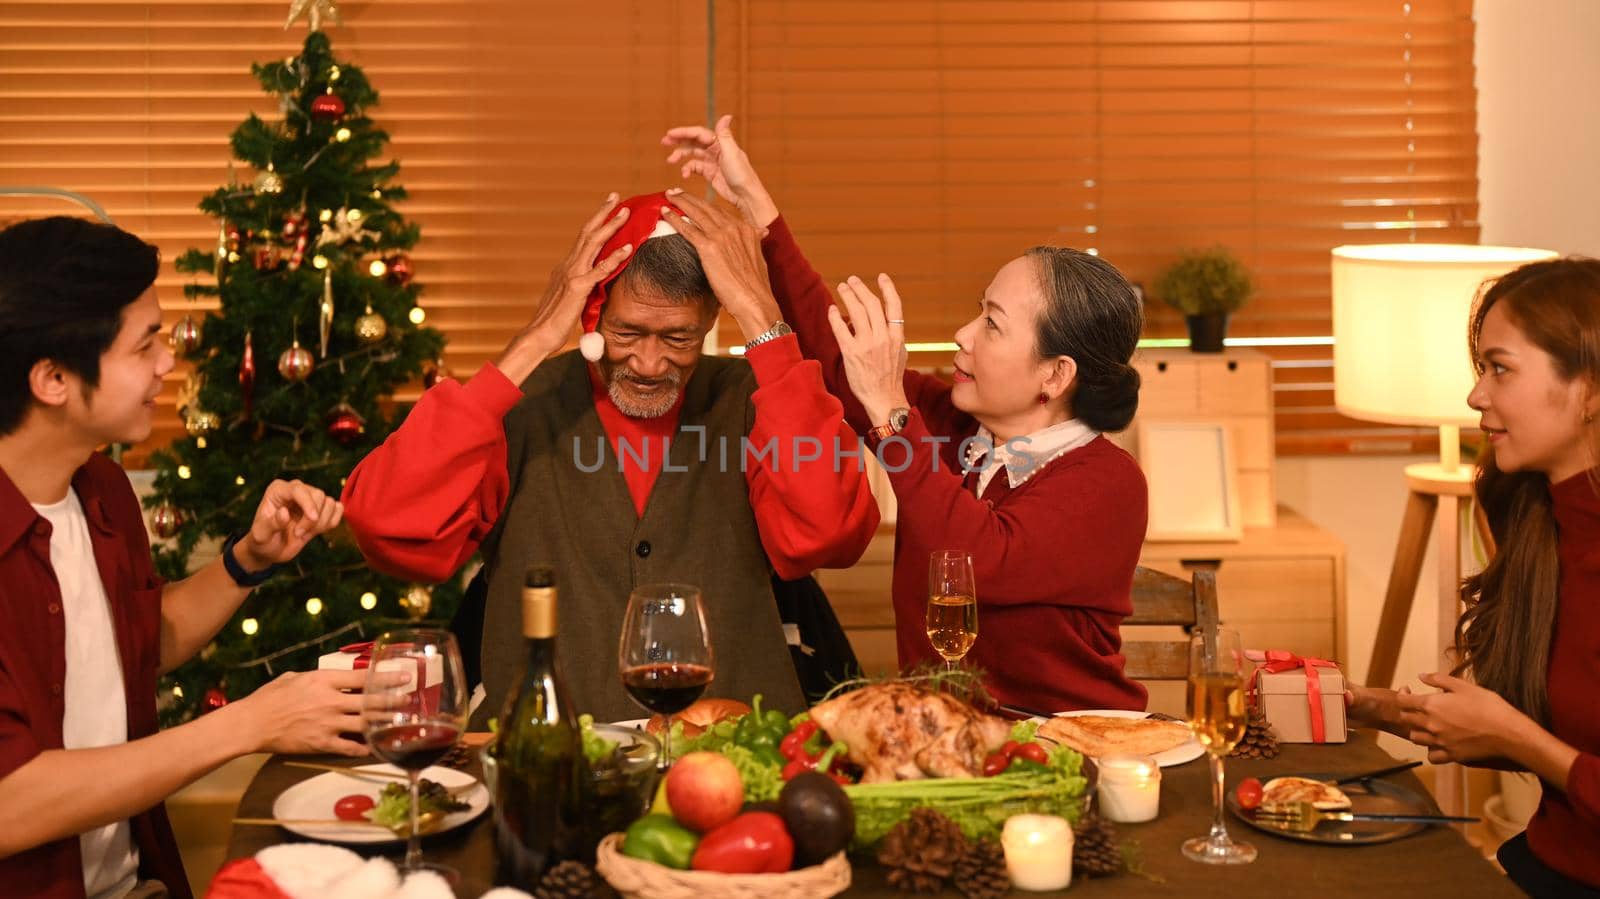 Image of happy family celebrating Christmas together at home lighted with soft lights and candles. Celebration, holidays and people concept by prathanchorruangsak